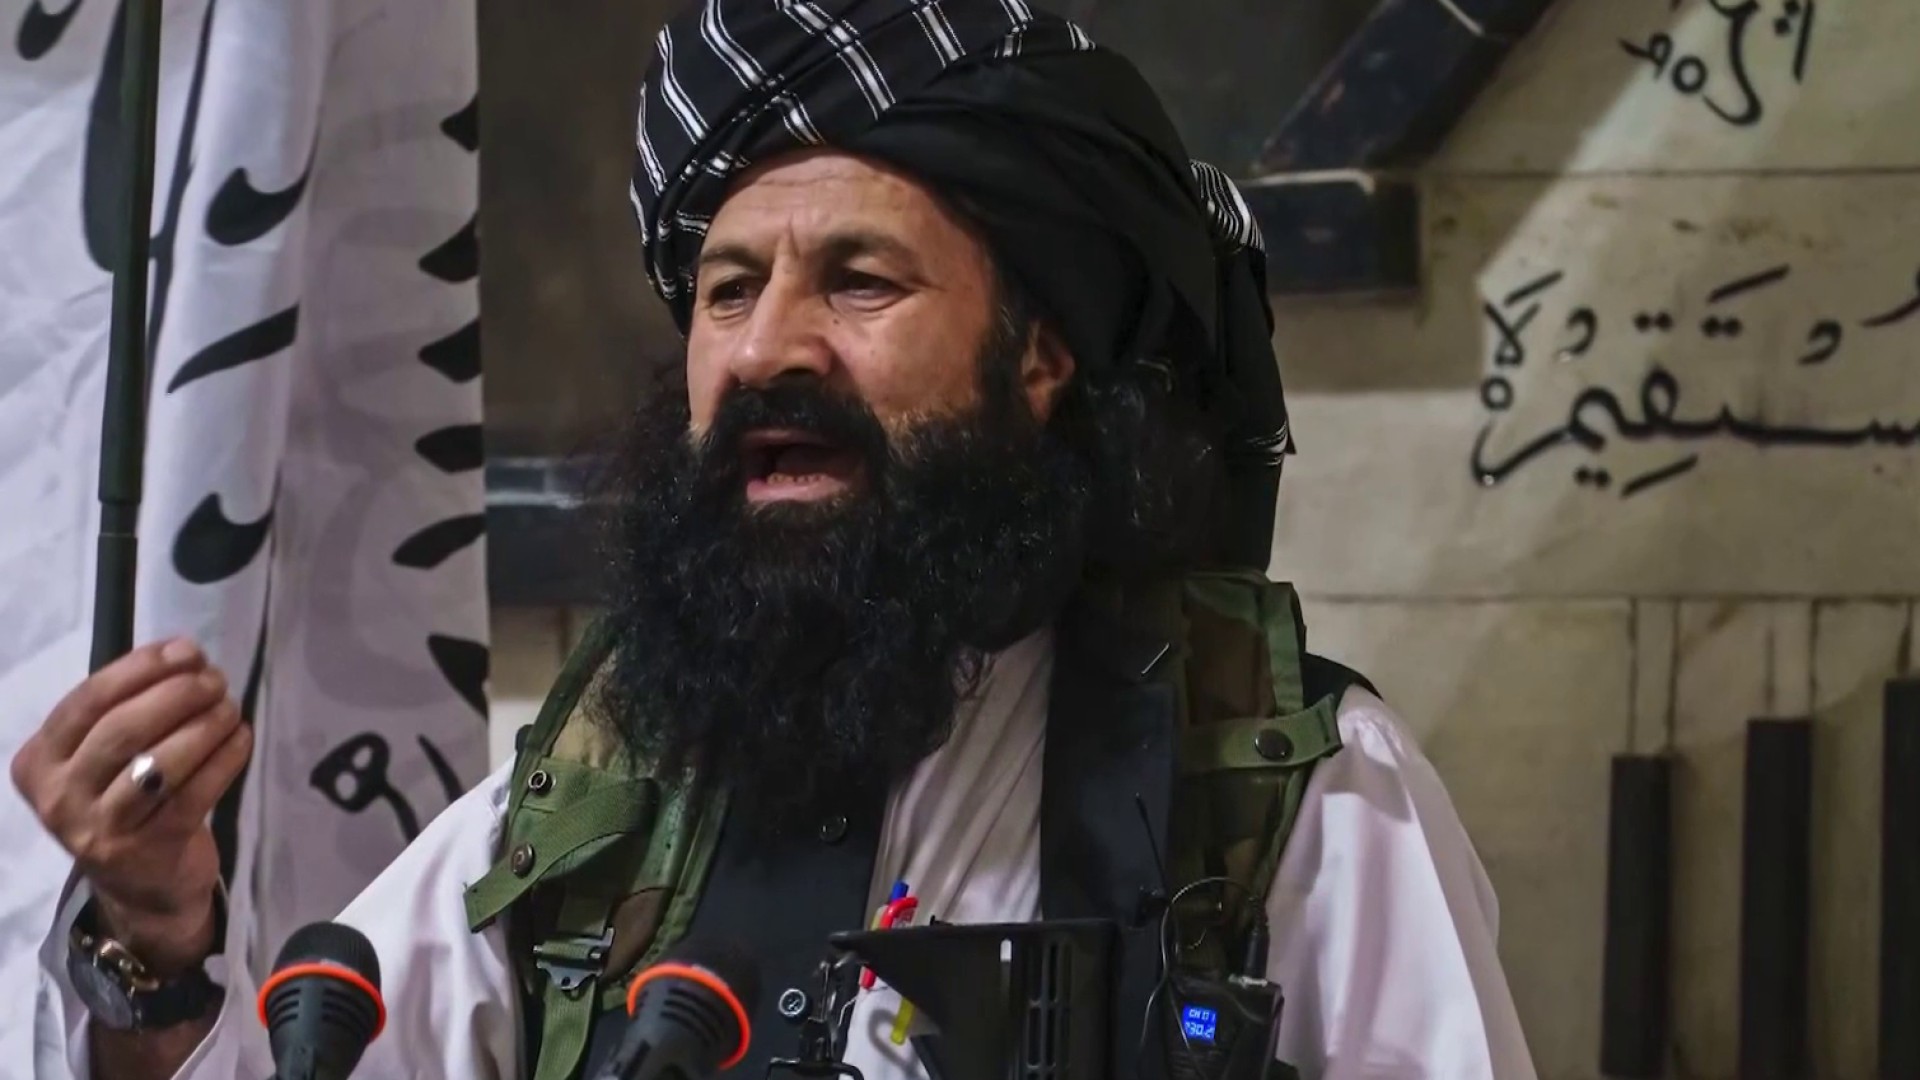 Taliban’s Self-Proclaimed Head Of Security Wanted By U.S. As A Terrorist